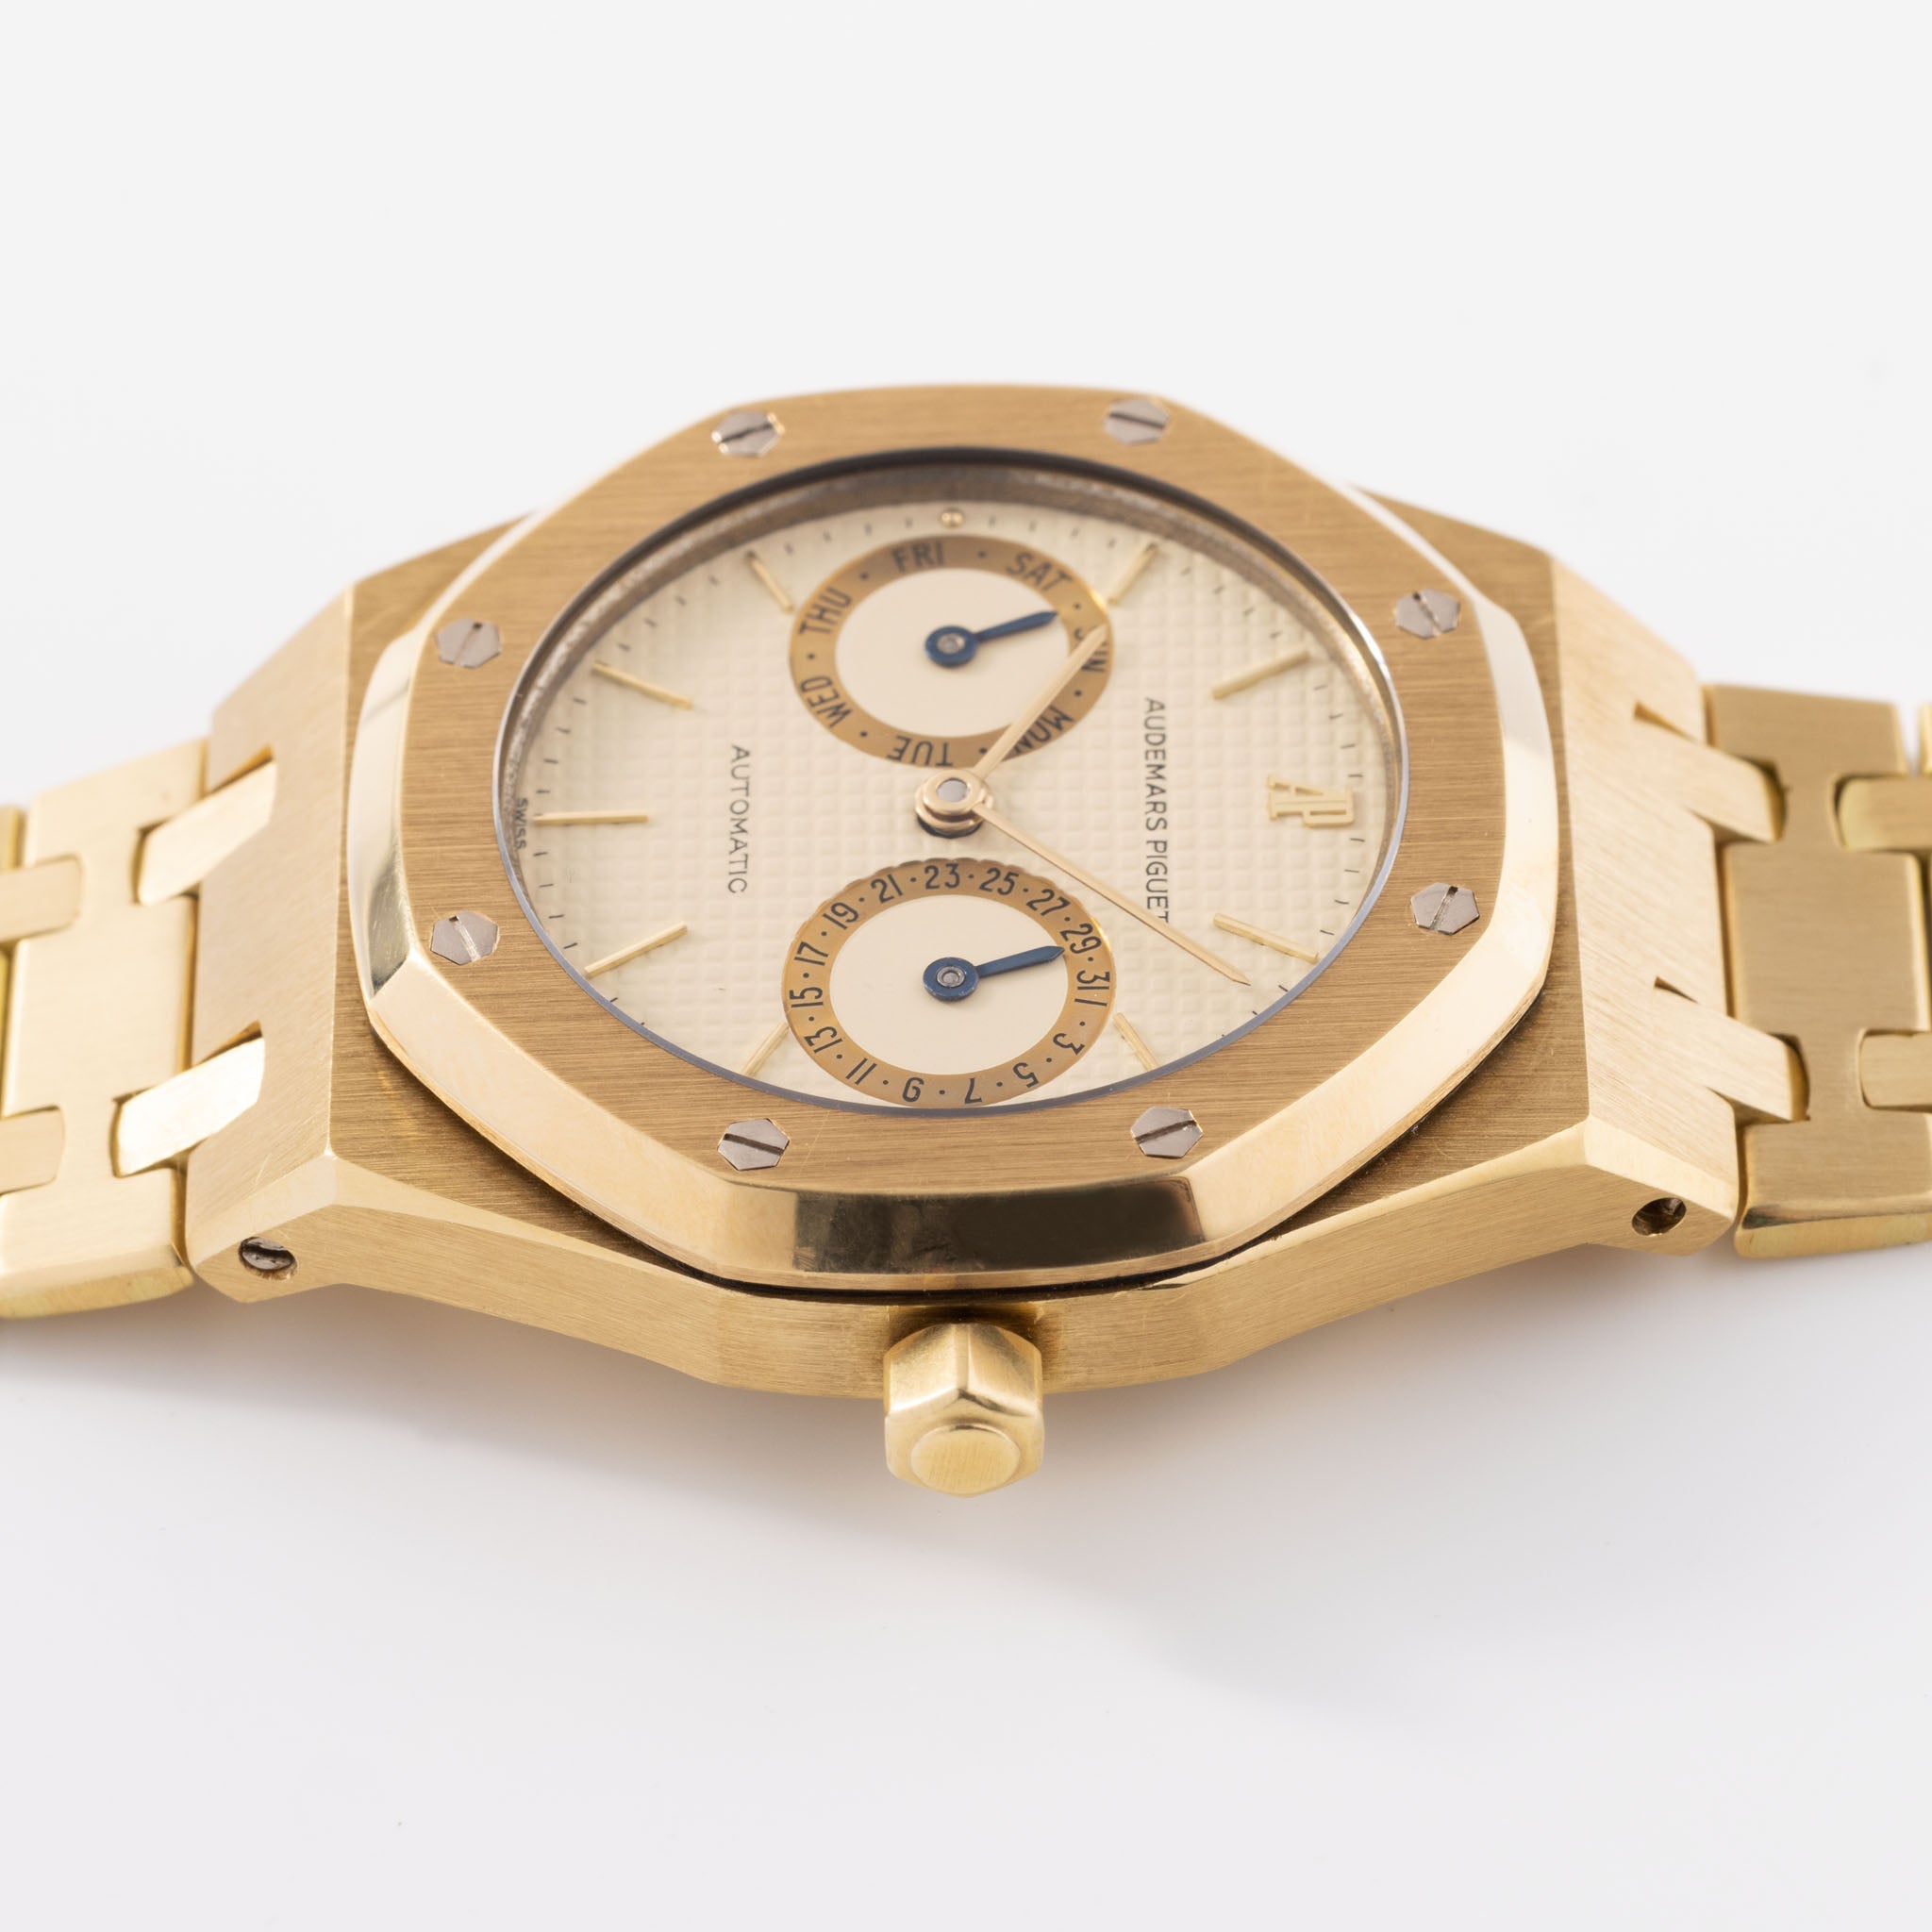 Audemars Piguet Royal Oak 5572BA Day-Date 18kt Yellow Gold "Owl" With Archive Extract